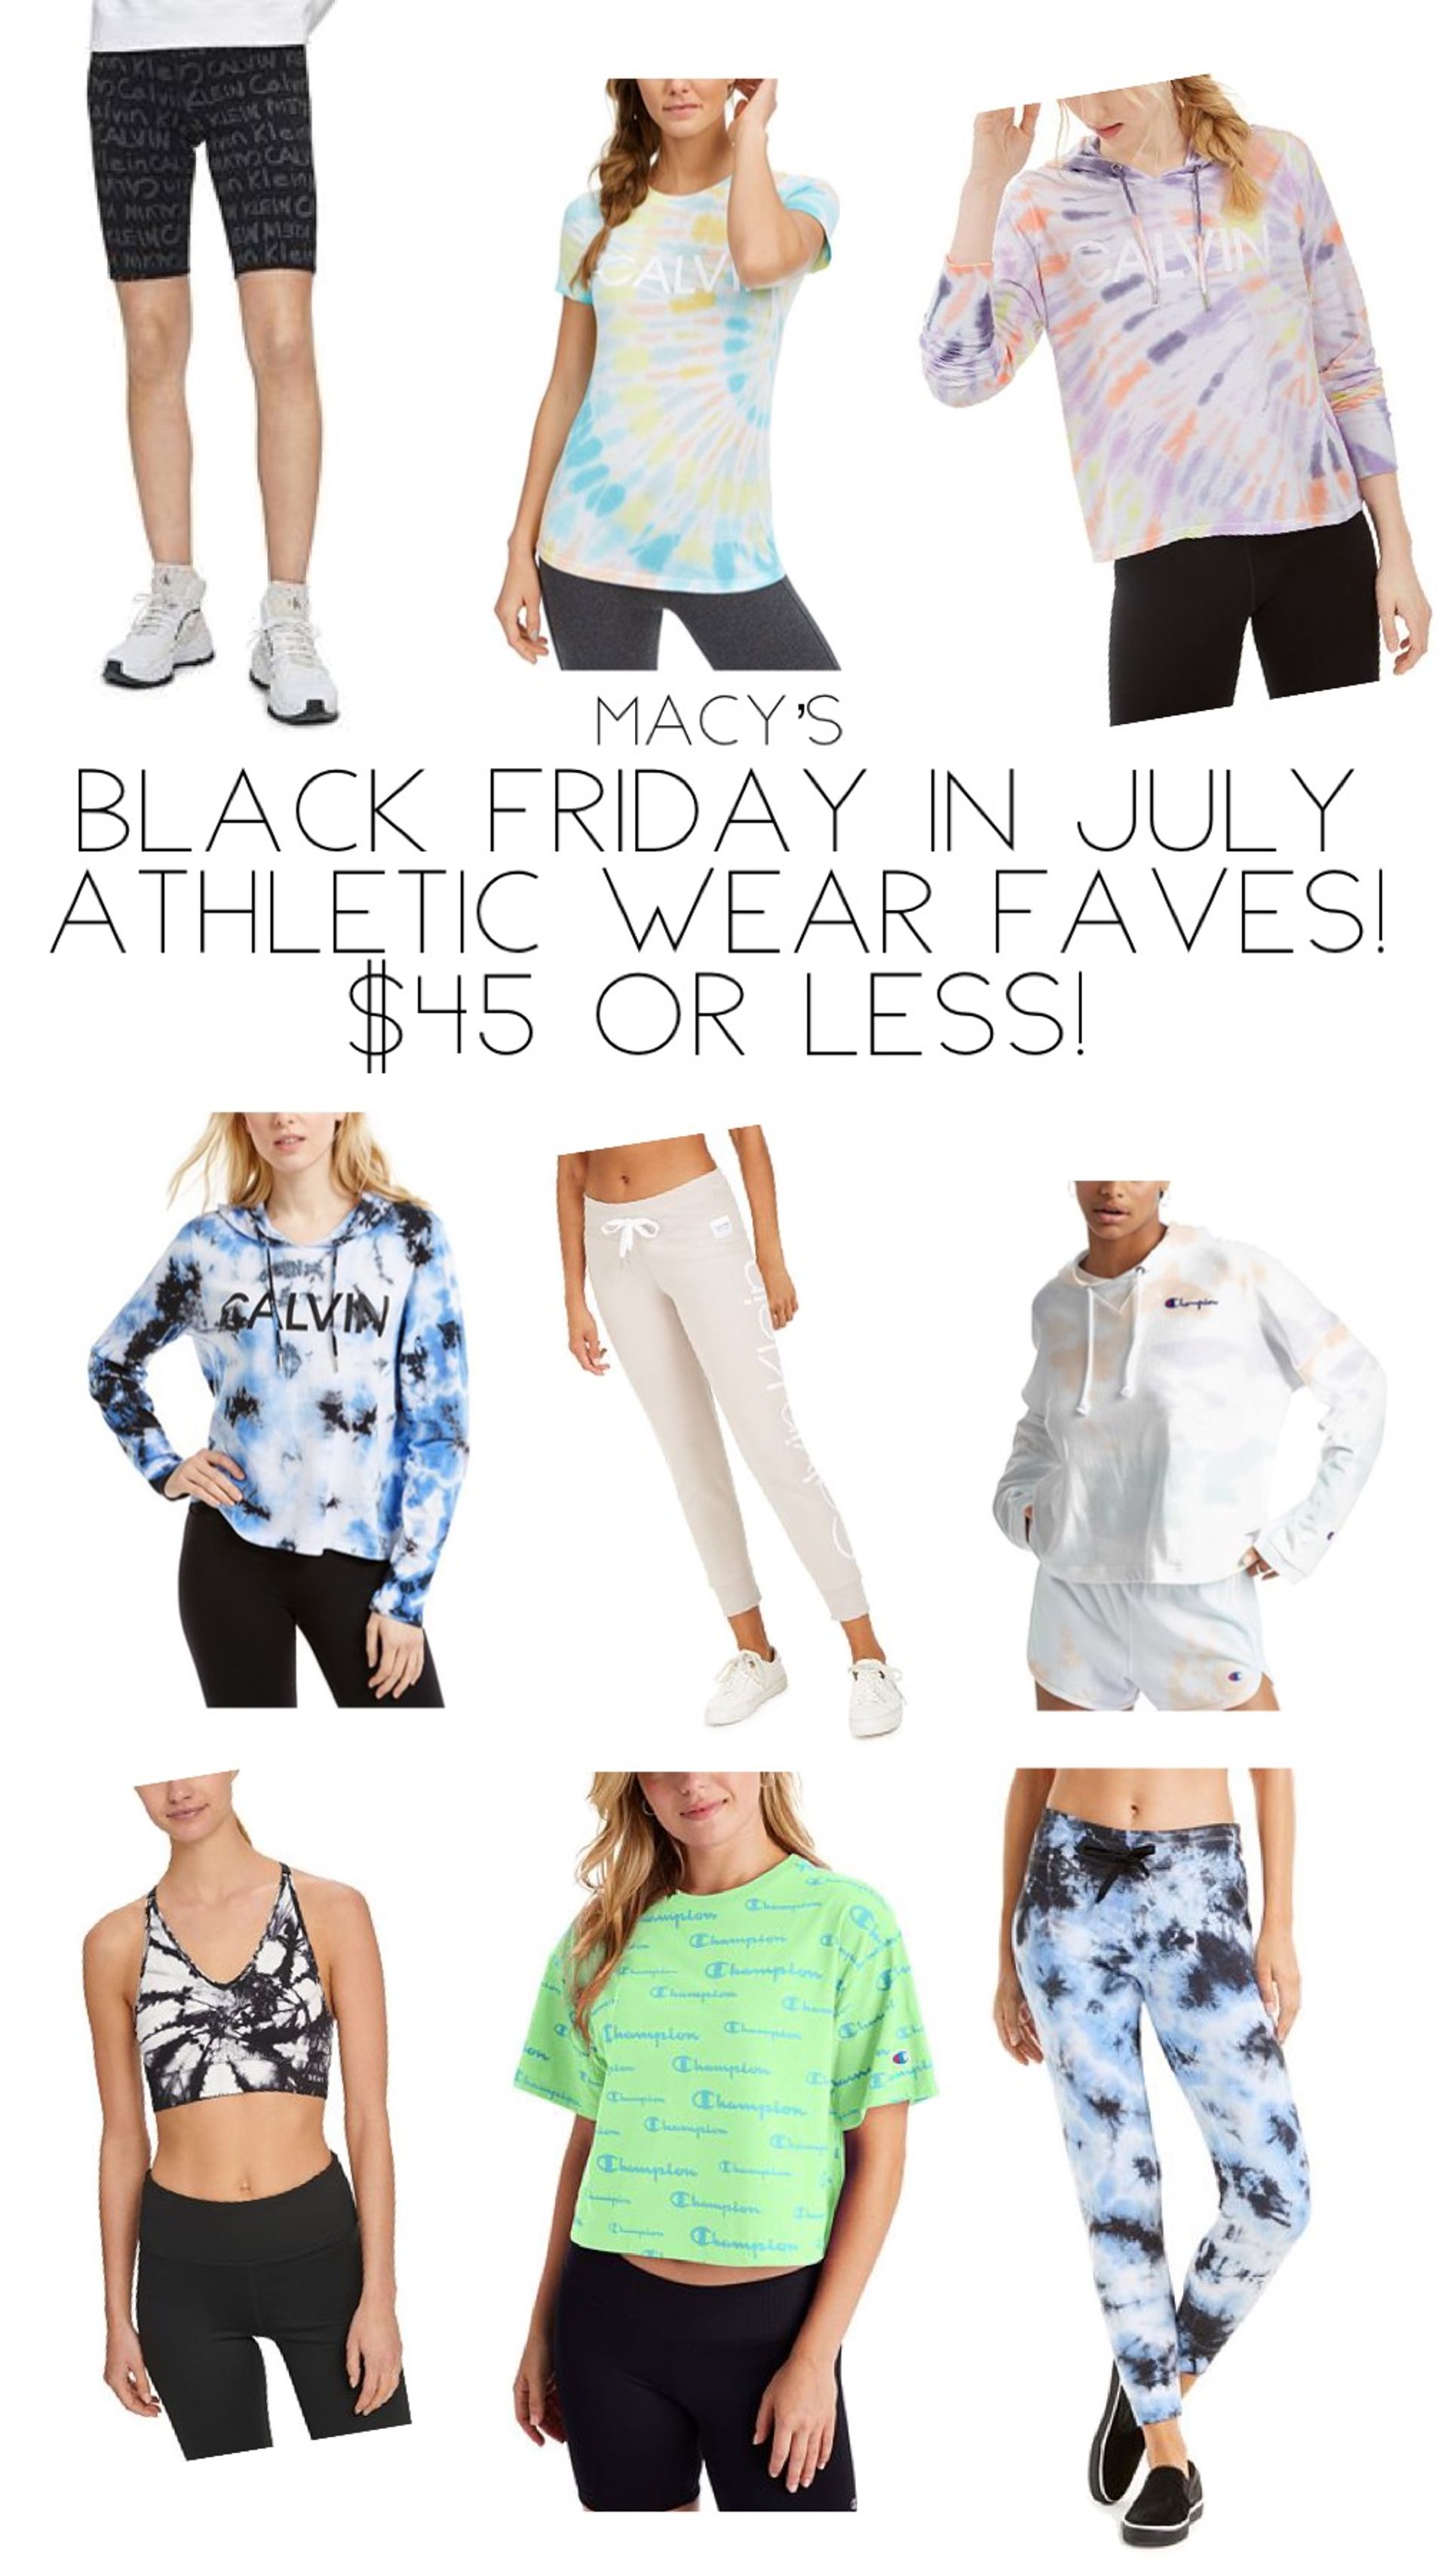 ATHLETIC WEAR FAVES - Macys Style Crew